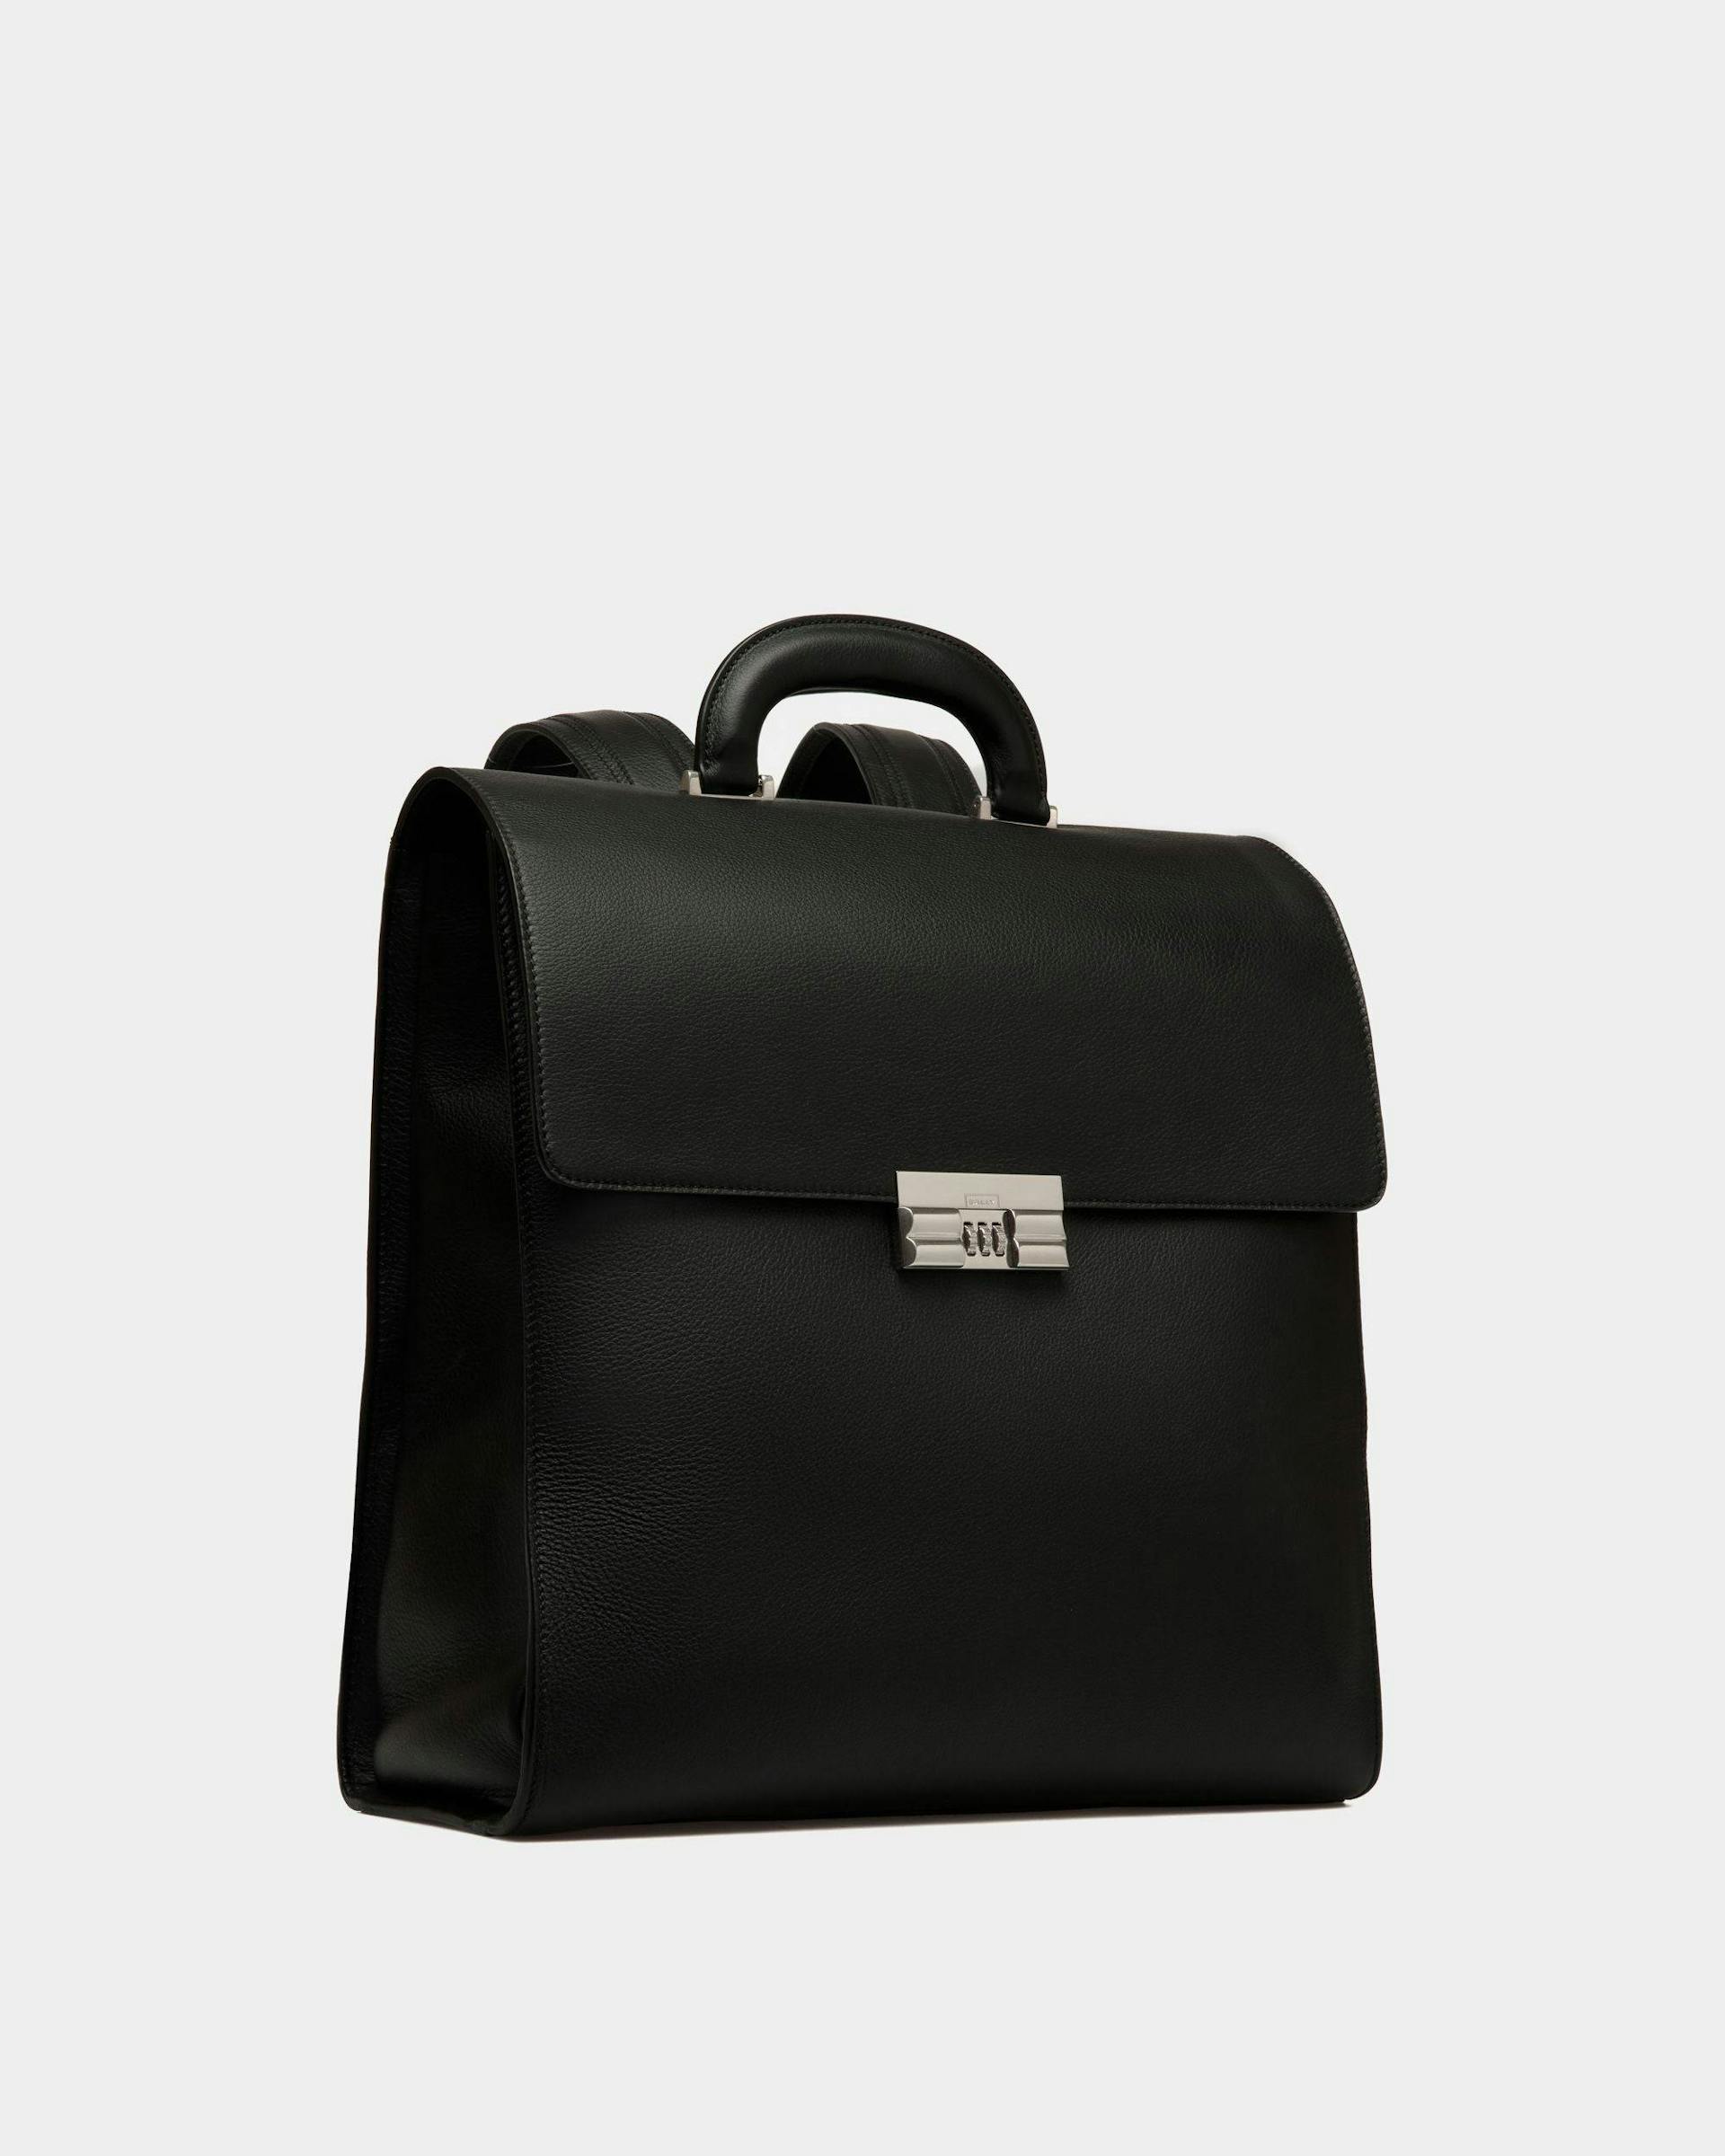 Men's Busy Bally Backpack in Leather | Bally | Still Life 3/4 Front